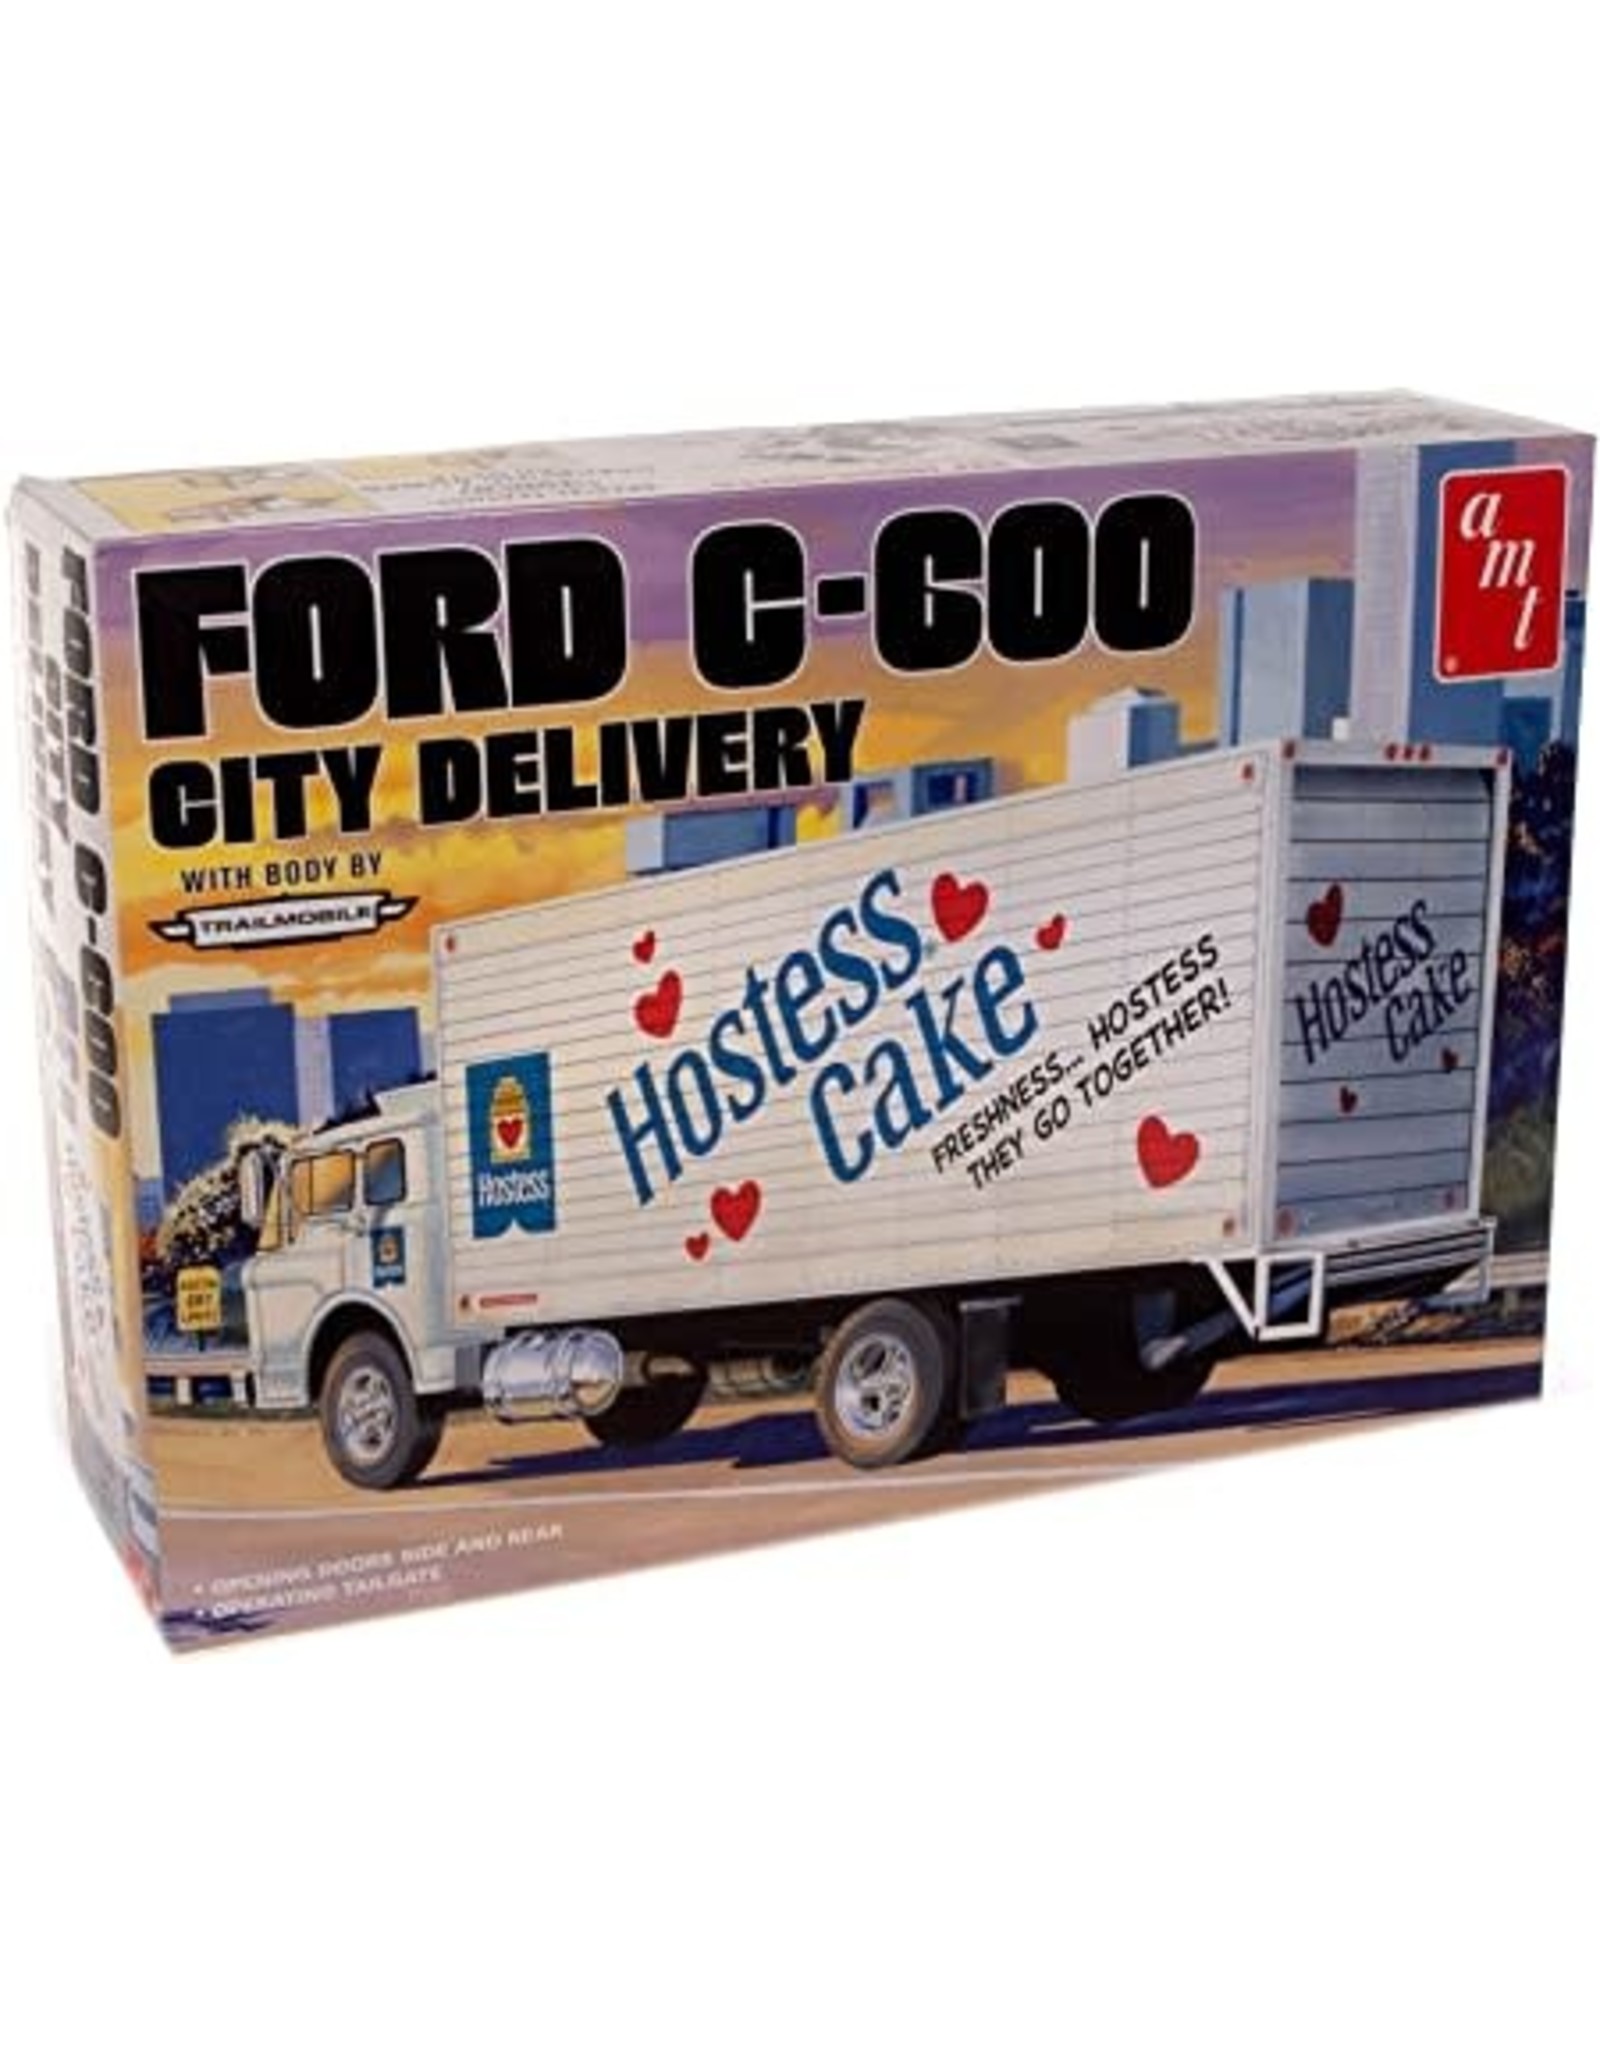 amt Ford C-600 city delivery